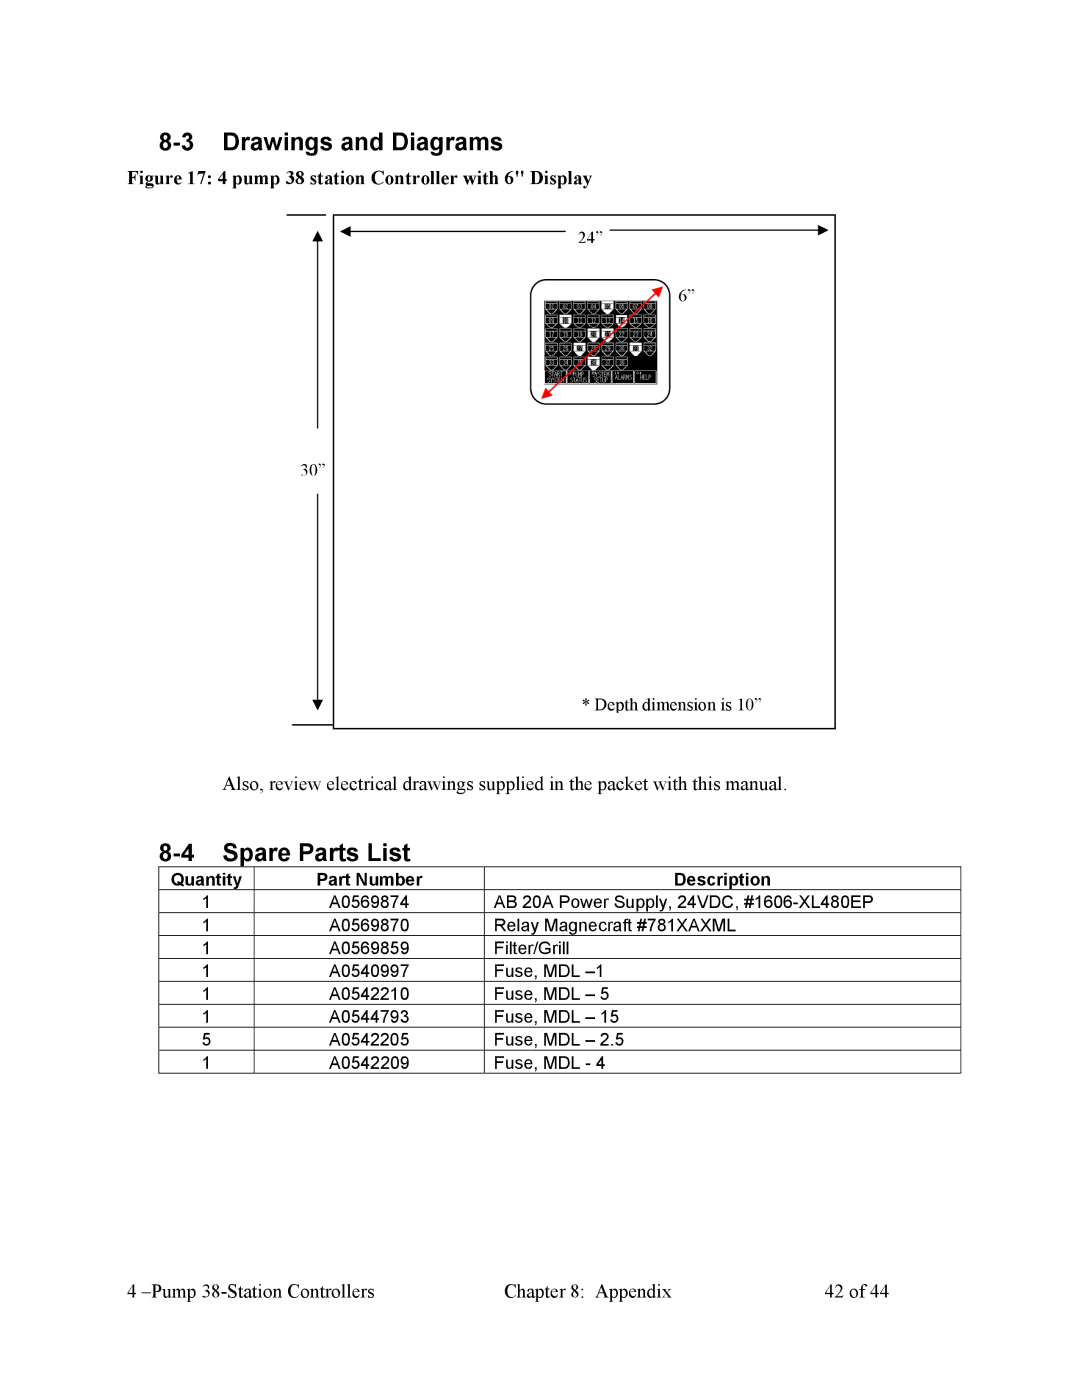 Sterling Plumbing 882.00253.00 specifications Drawings and Diagrams, Spare Parts List, Quantity Part Number Description 